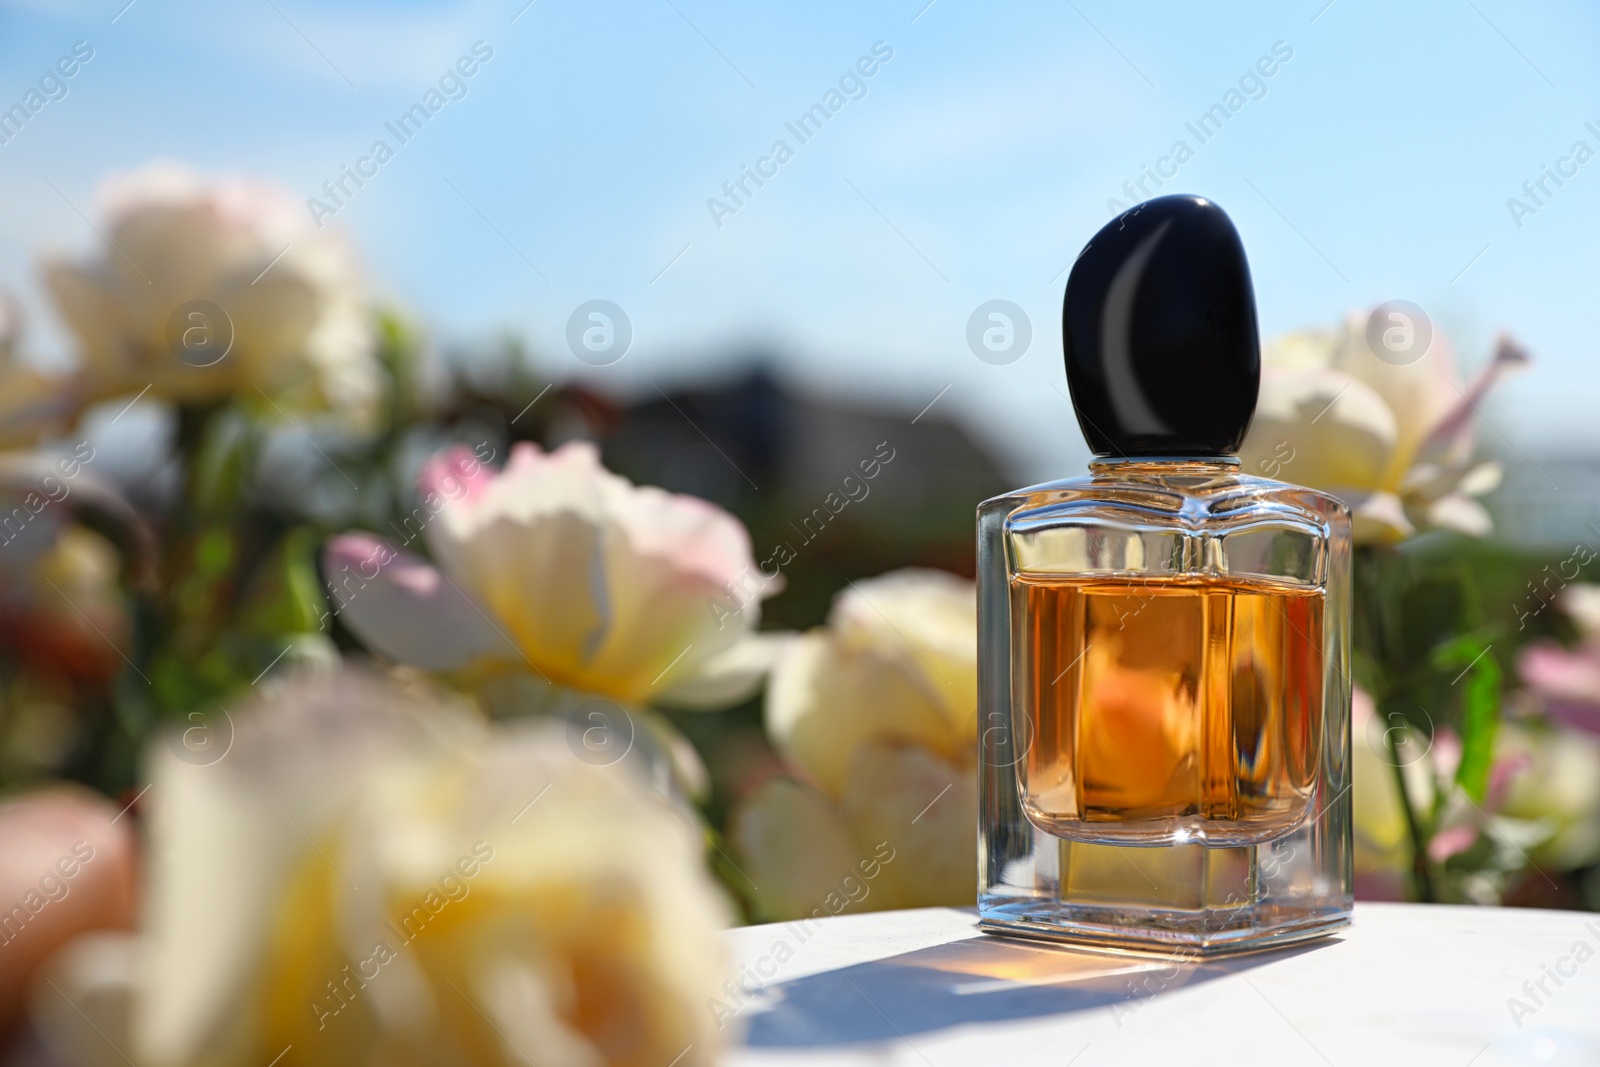 Photo of Bottle with rose perfume on table among flowers in blooming garden, space for text